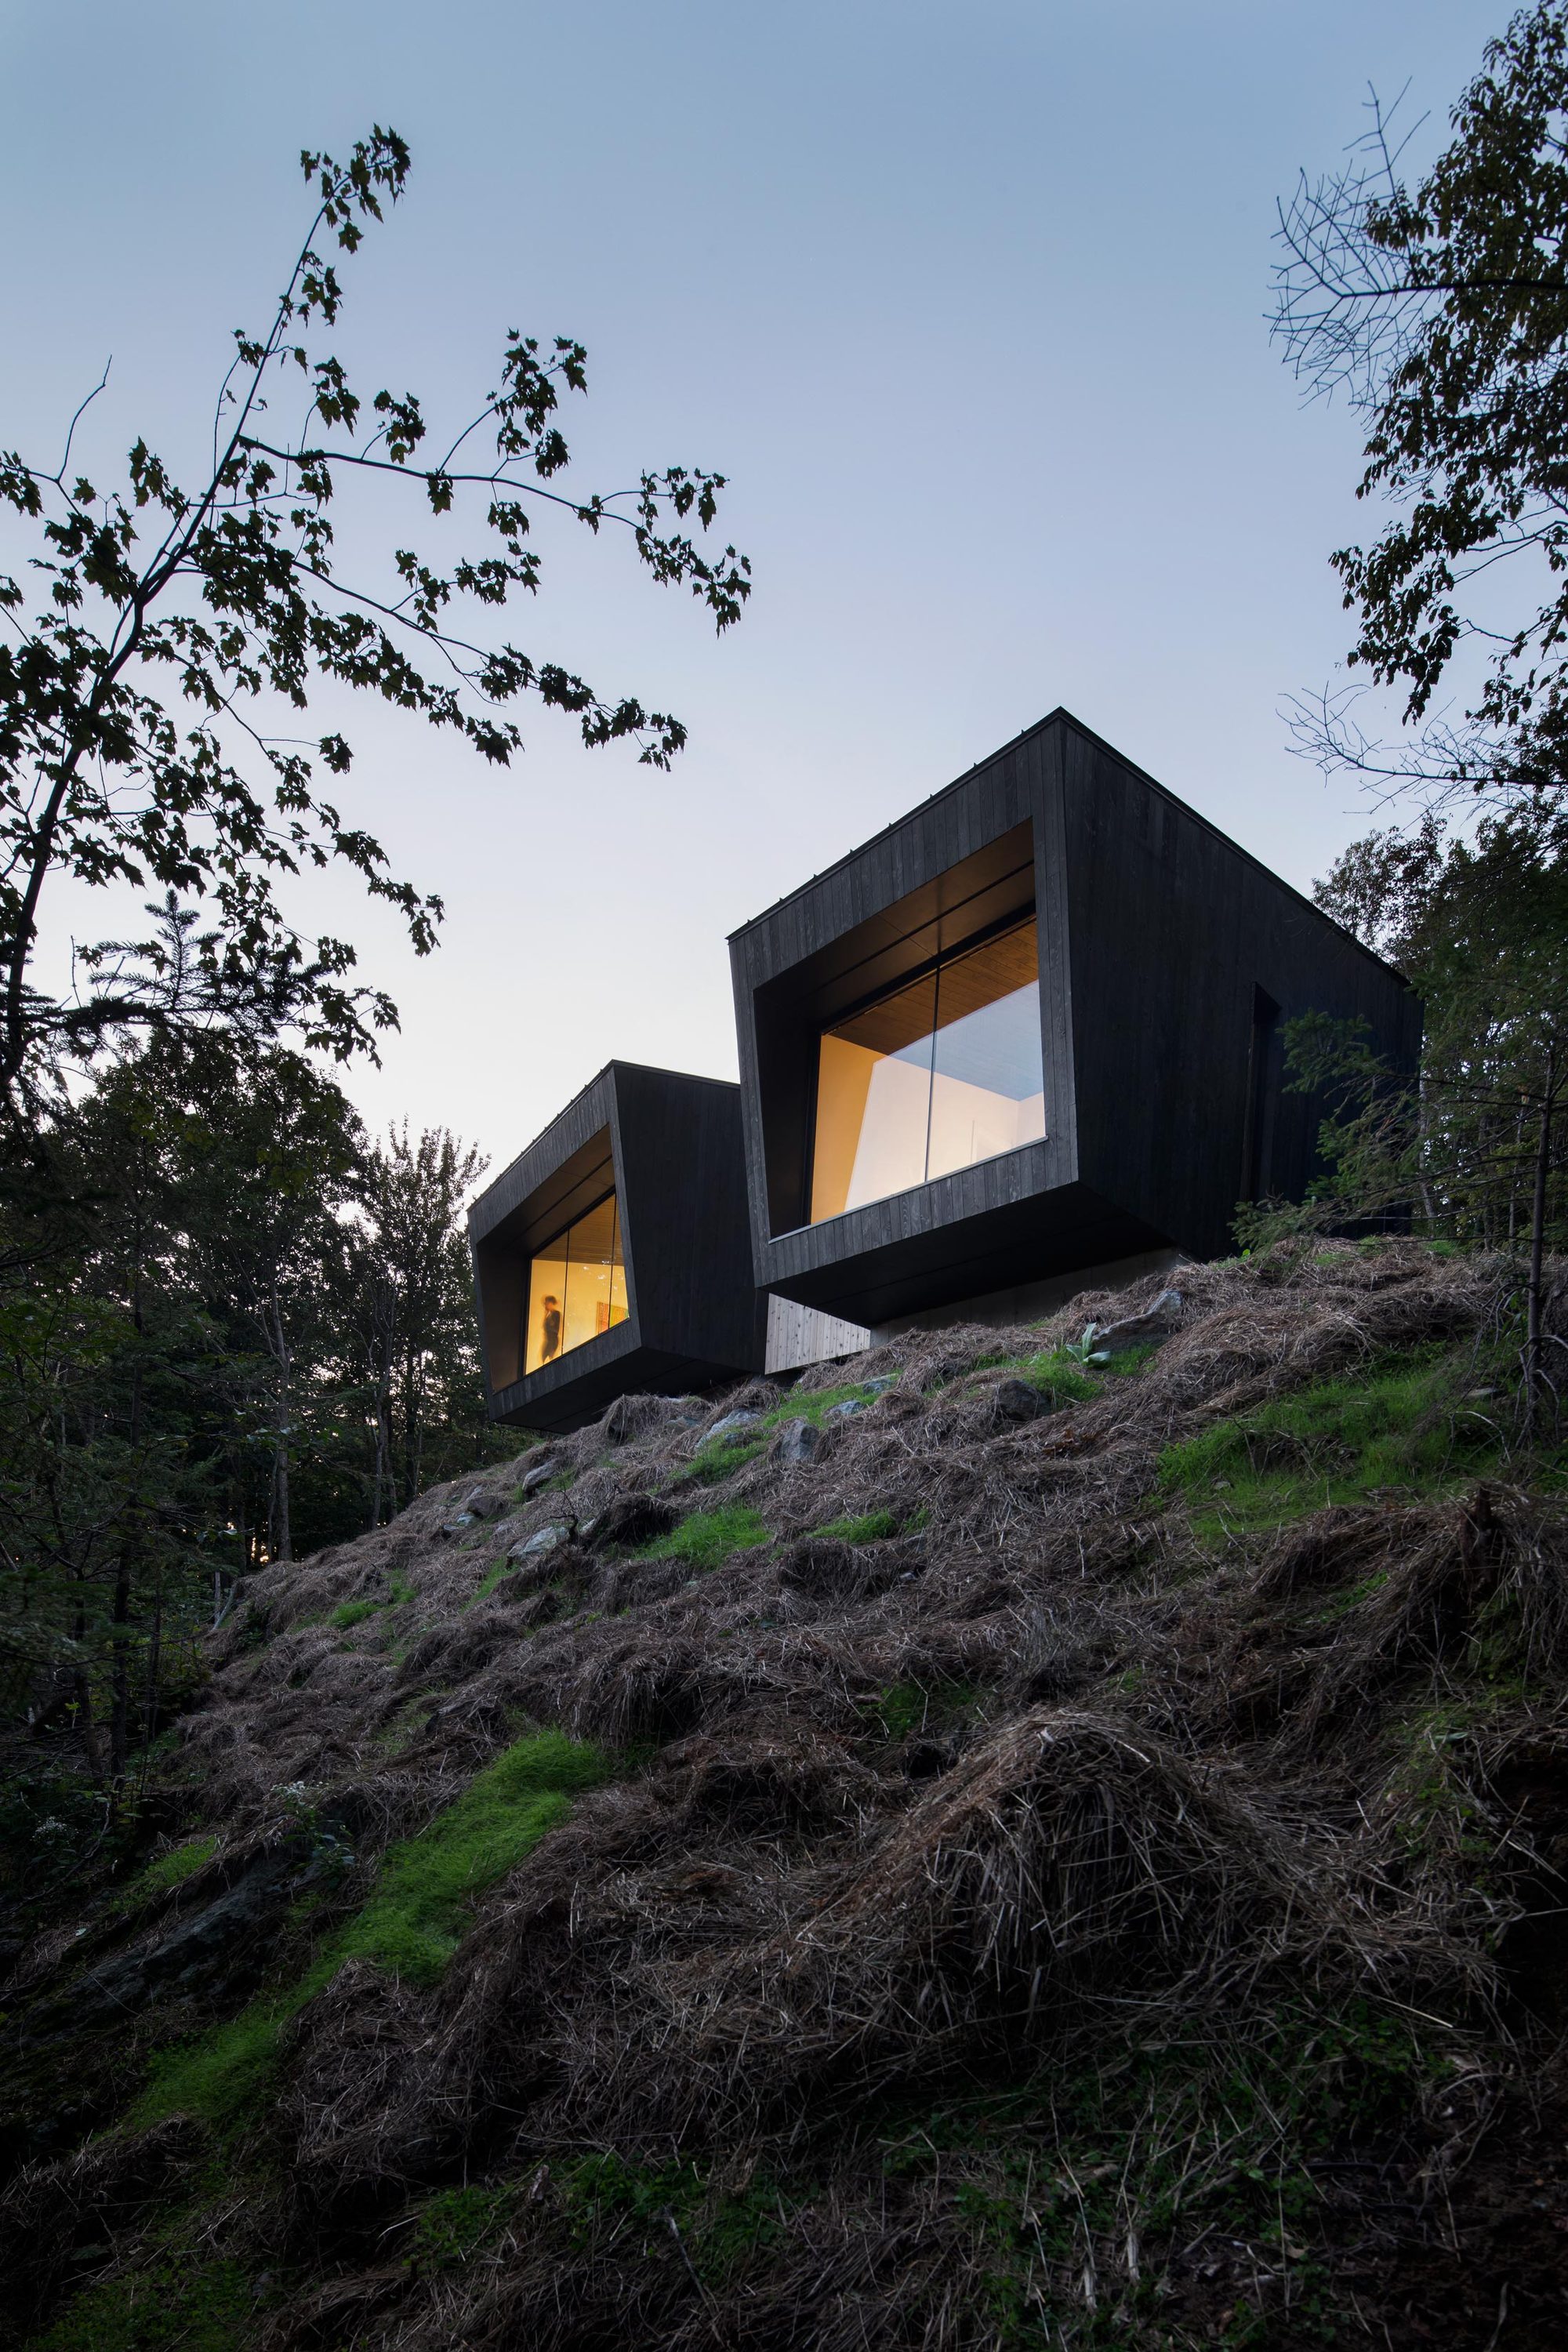 Minimal and modern cabin sits on the edge of a cliff